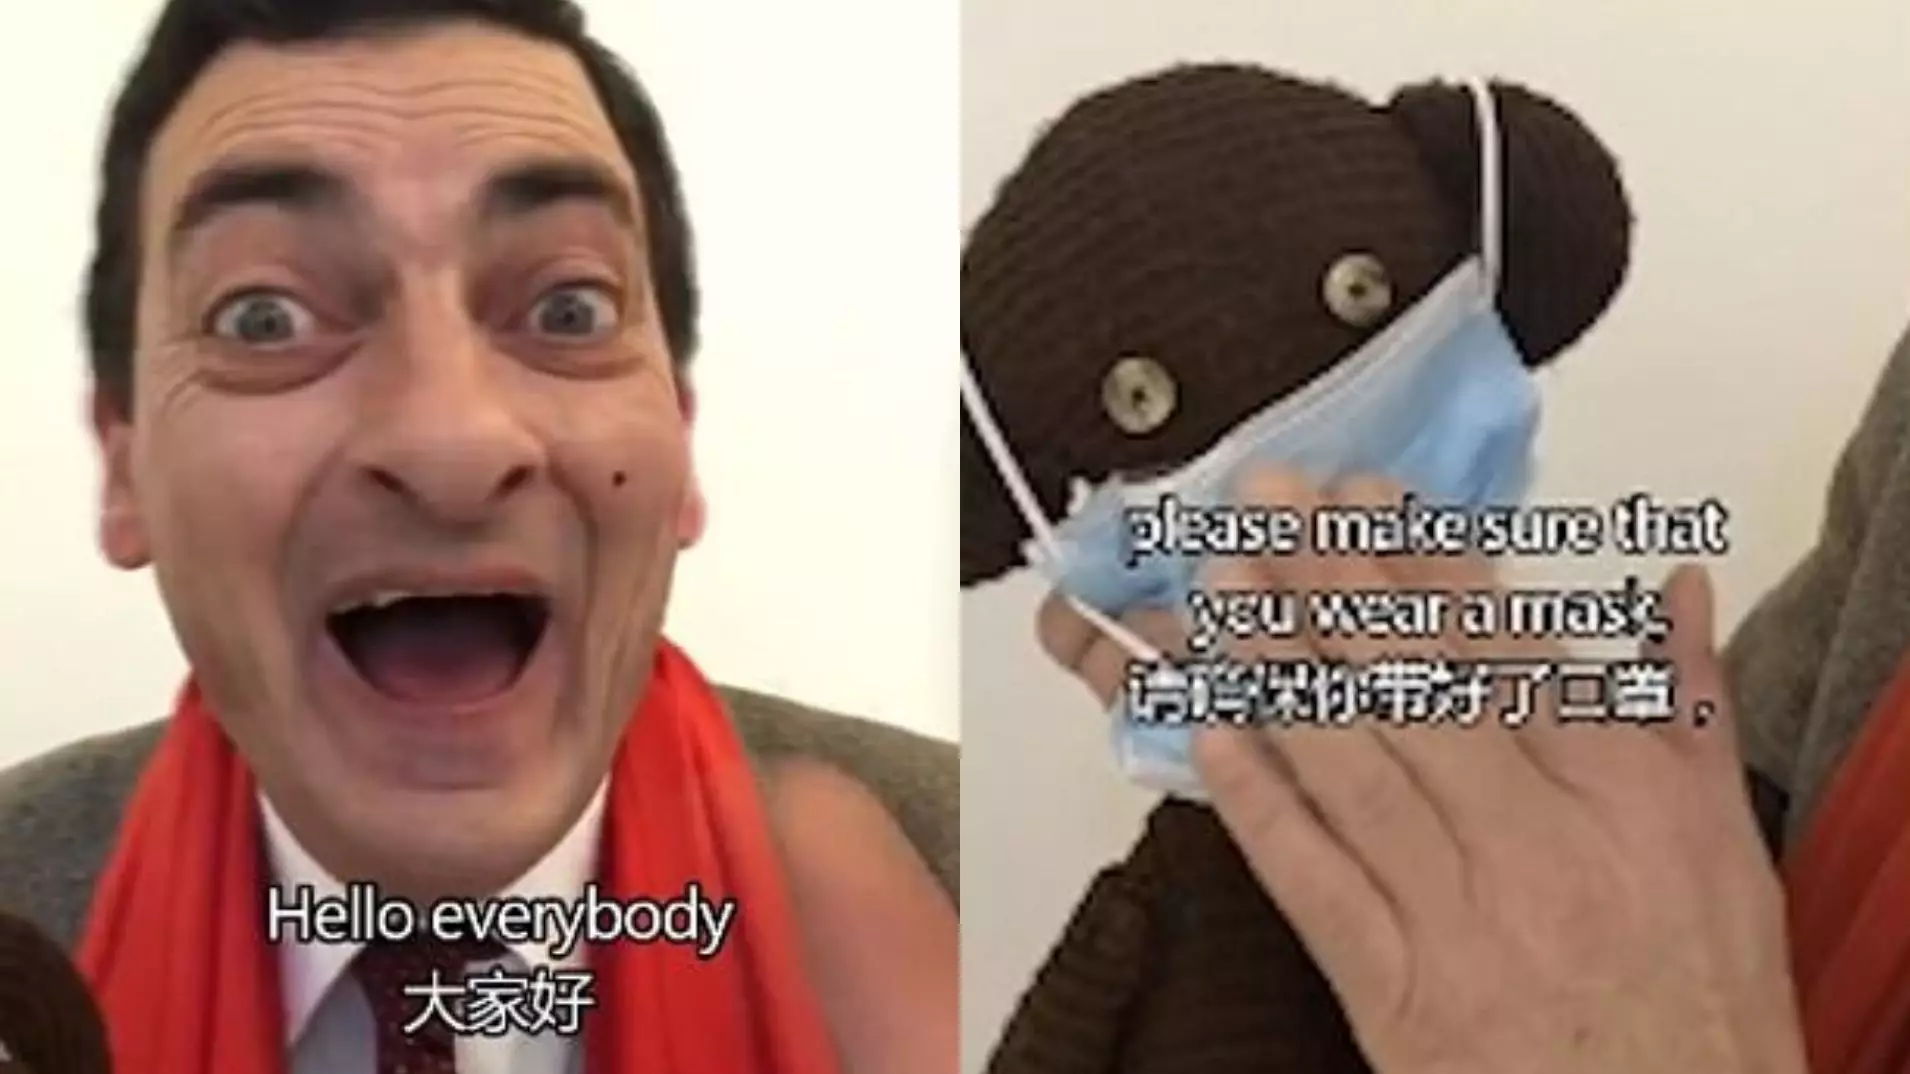 British Mr Bean Impersonator Refused To Leave Wuhan Due To Risk Of Spreading Coronavirus